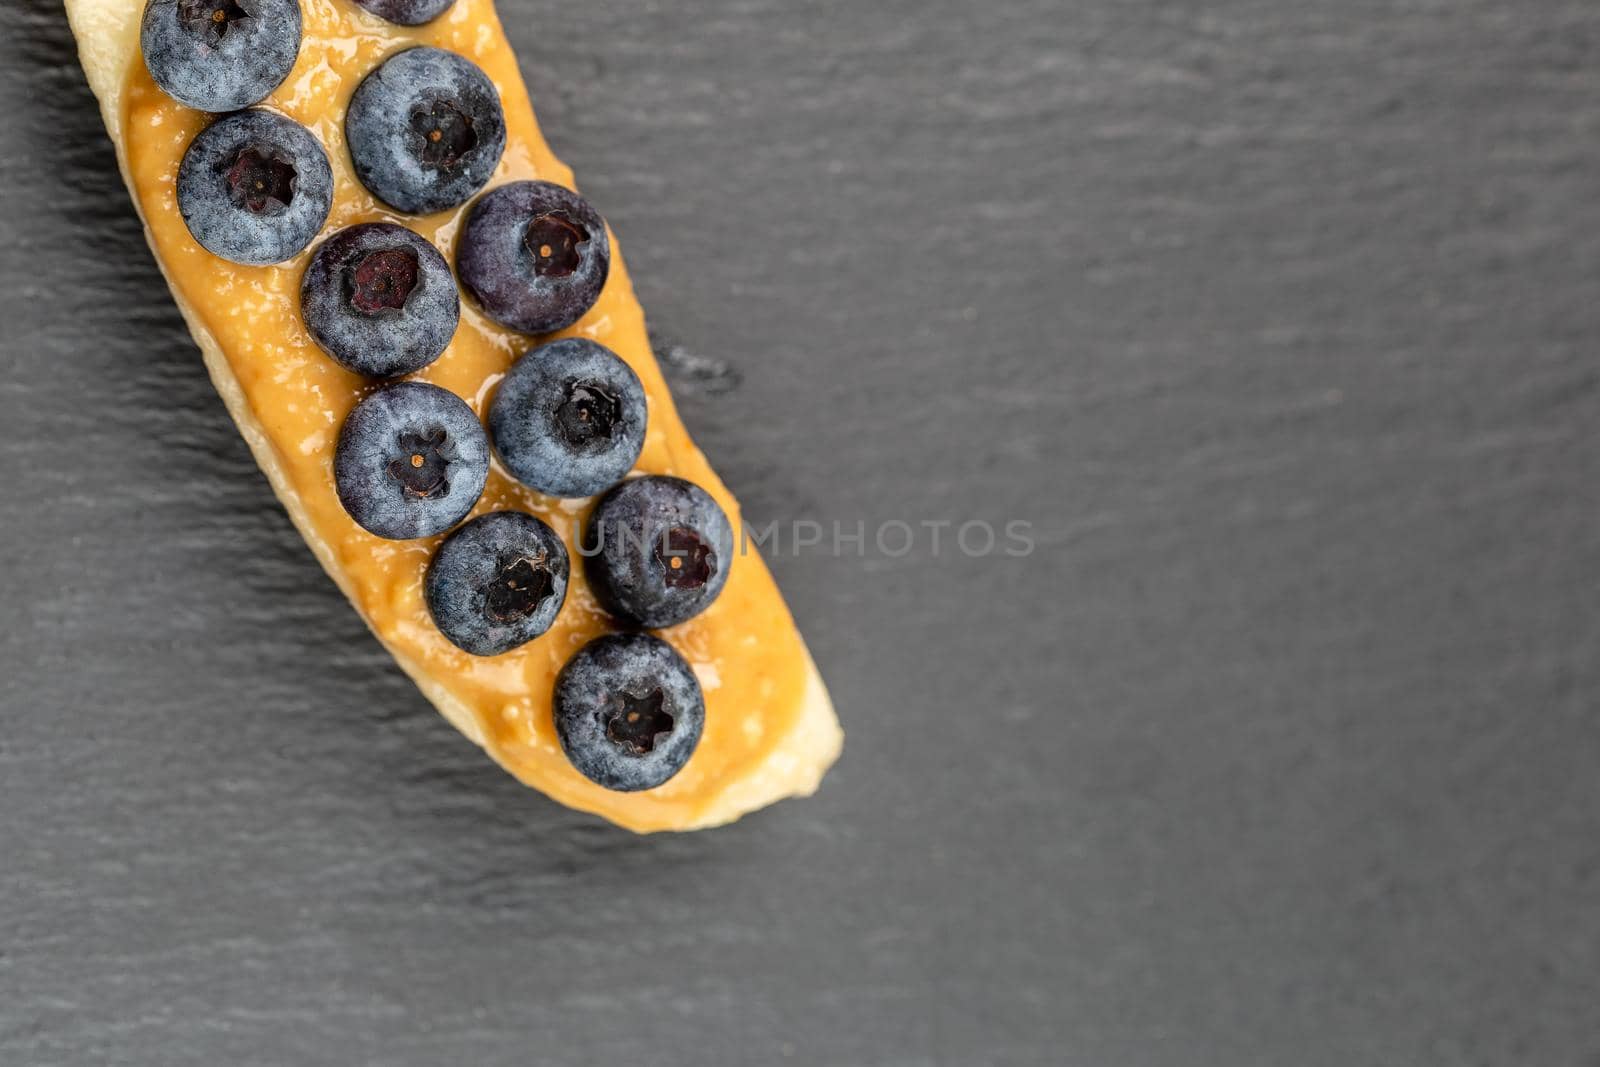 Healthy appetizers with sliced bananas with peanut butter spread and blueberries on the top on the slate plate, space for text